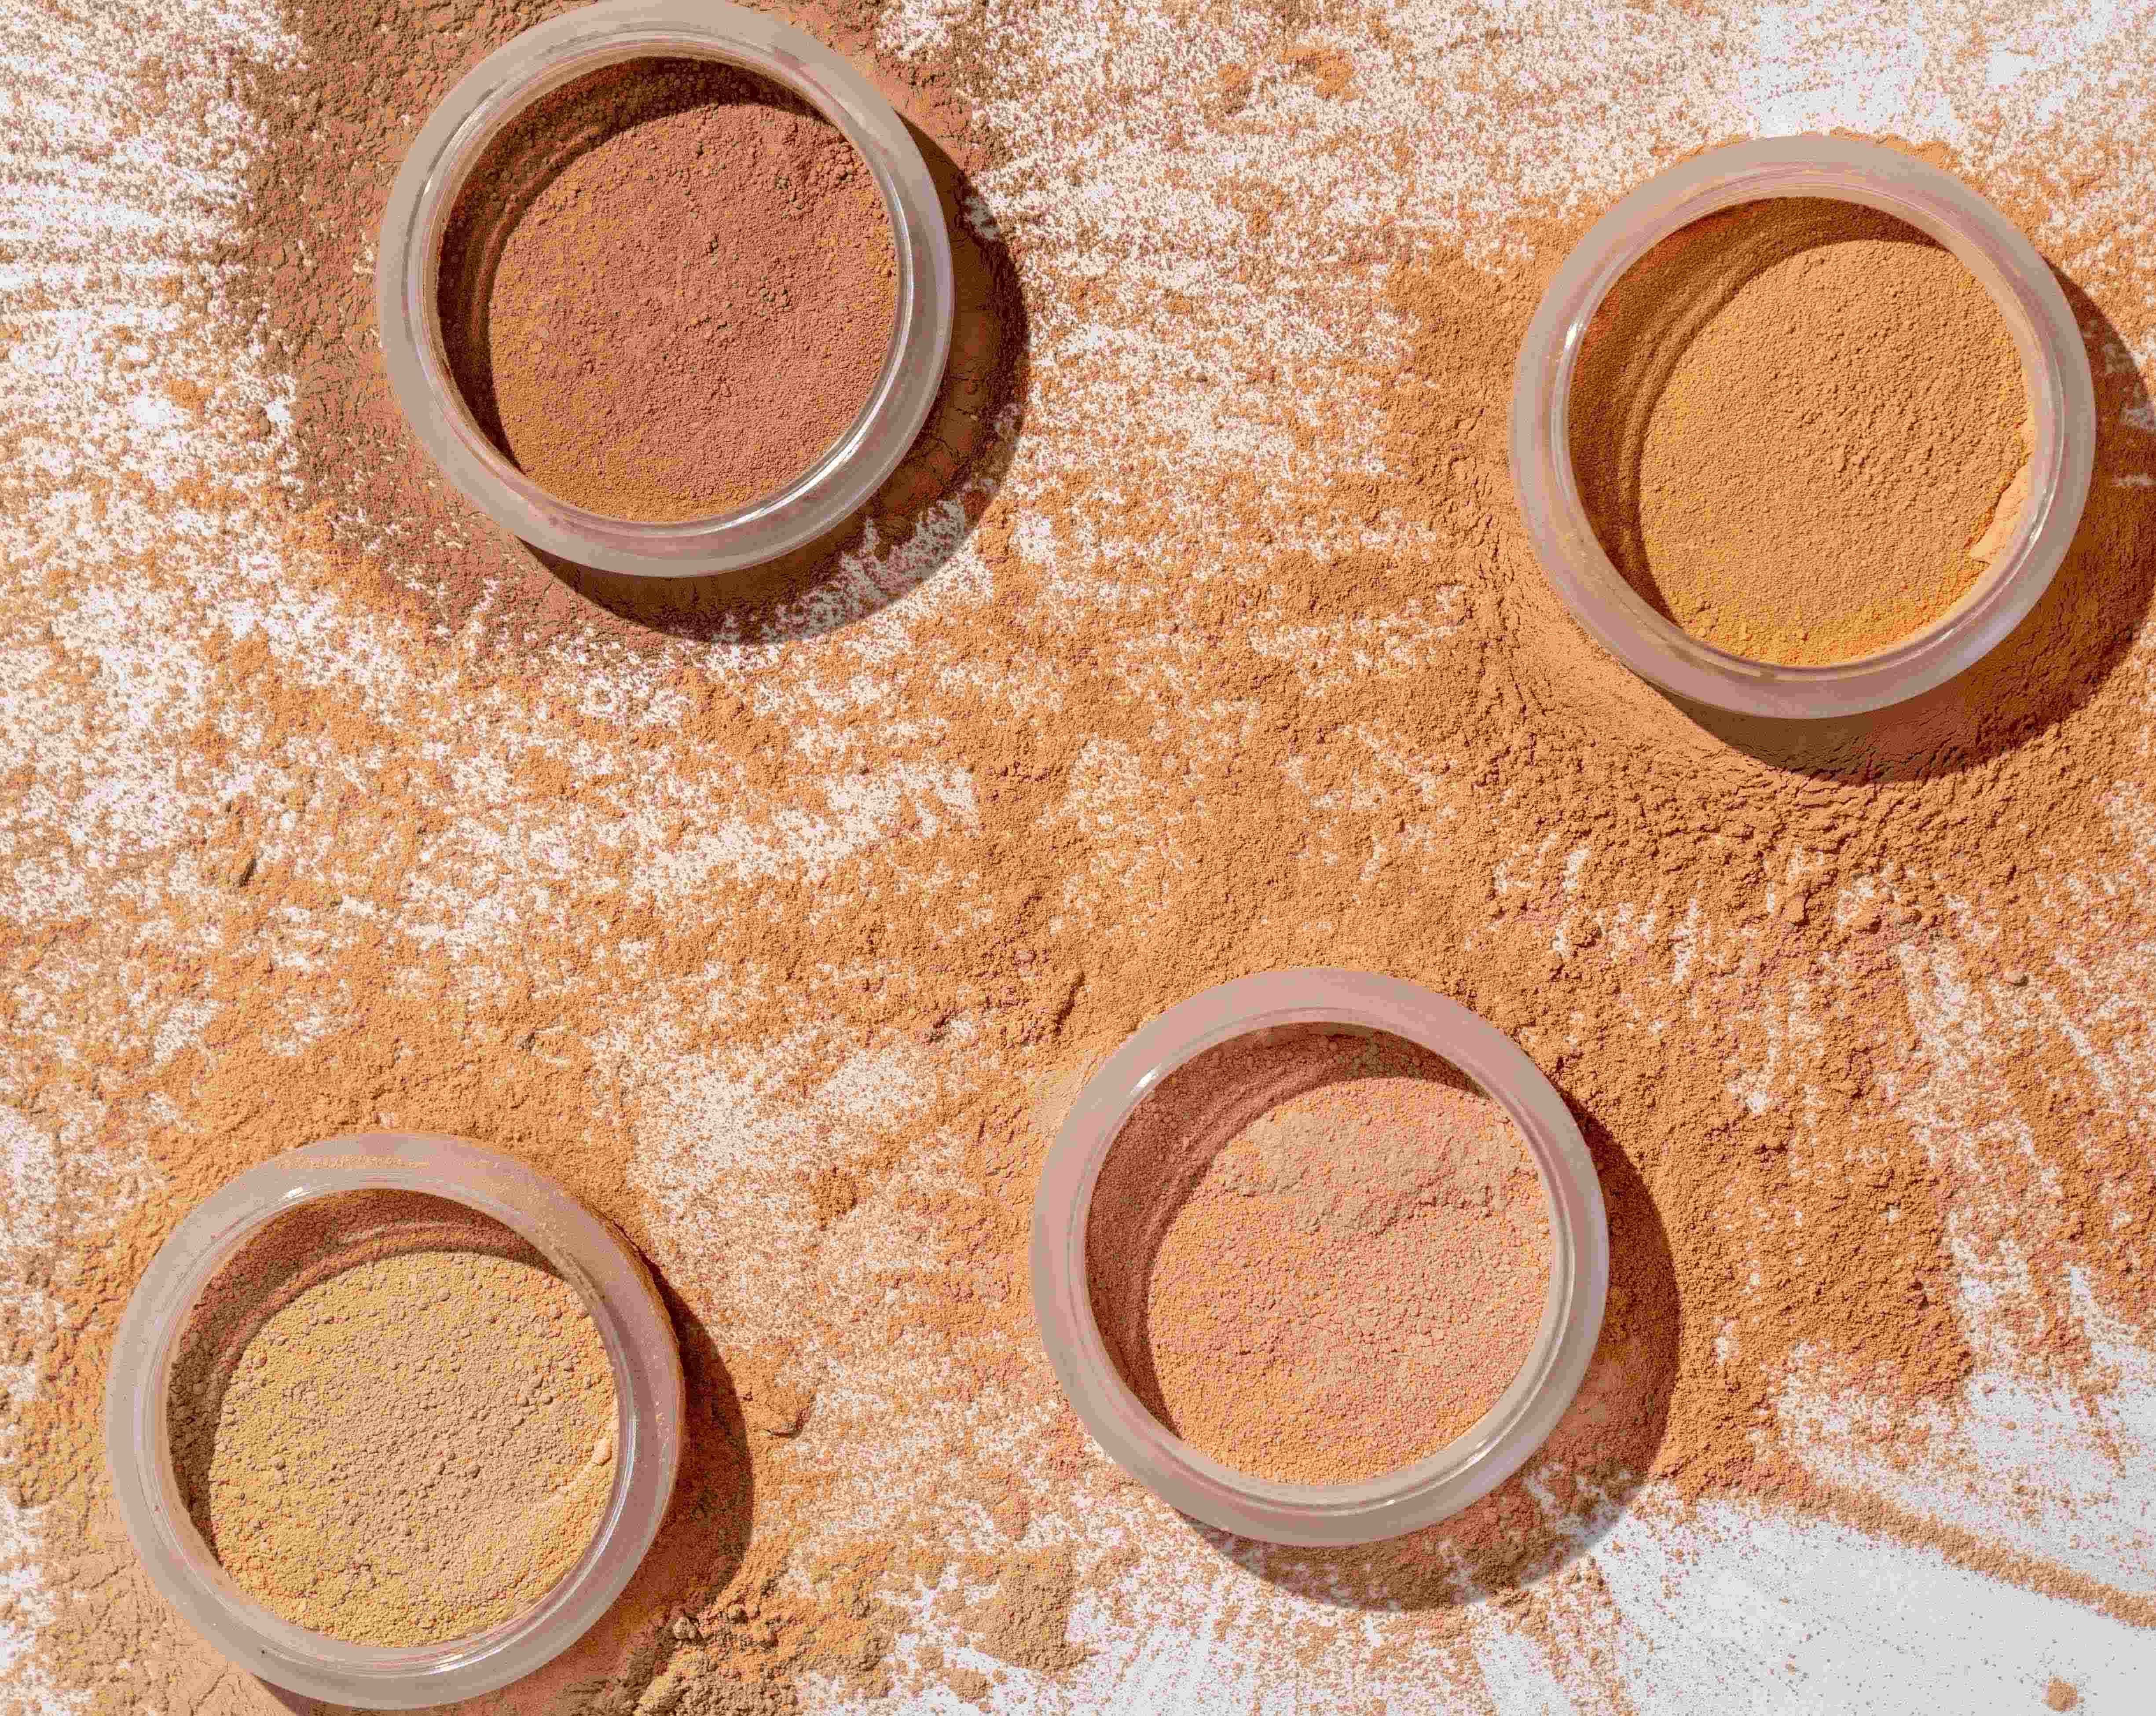 SPF Loose Powder - The perfect +1 for your Tinted Sunscreen